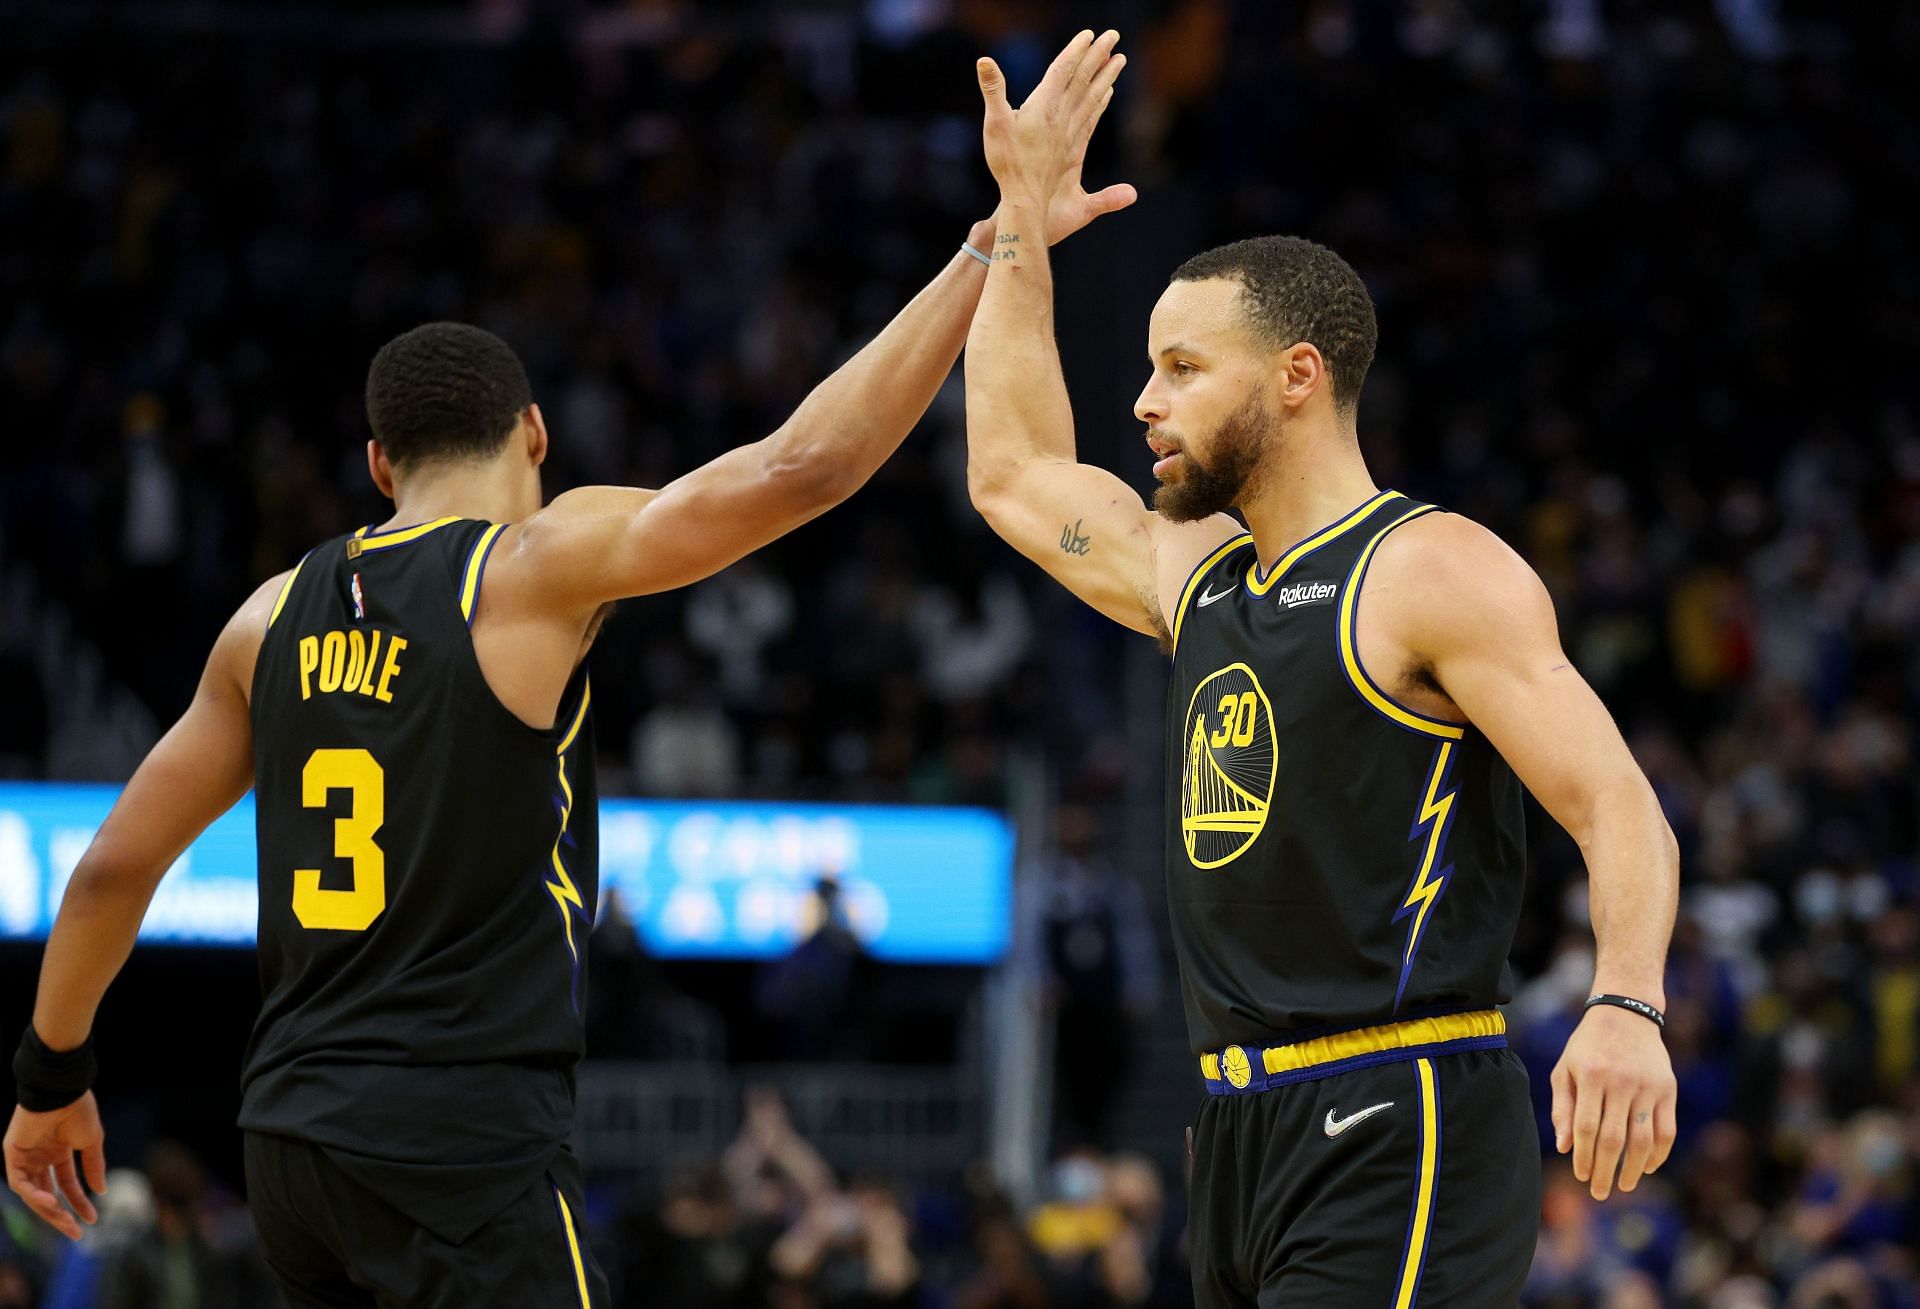 Jordan Poole and Steph Curry high-five each other during Miami Heat v Golden State Warriors